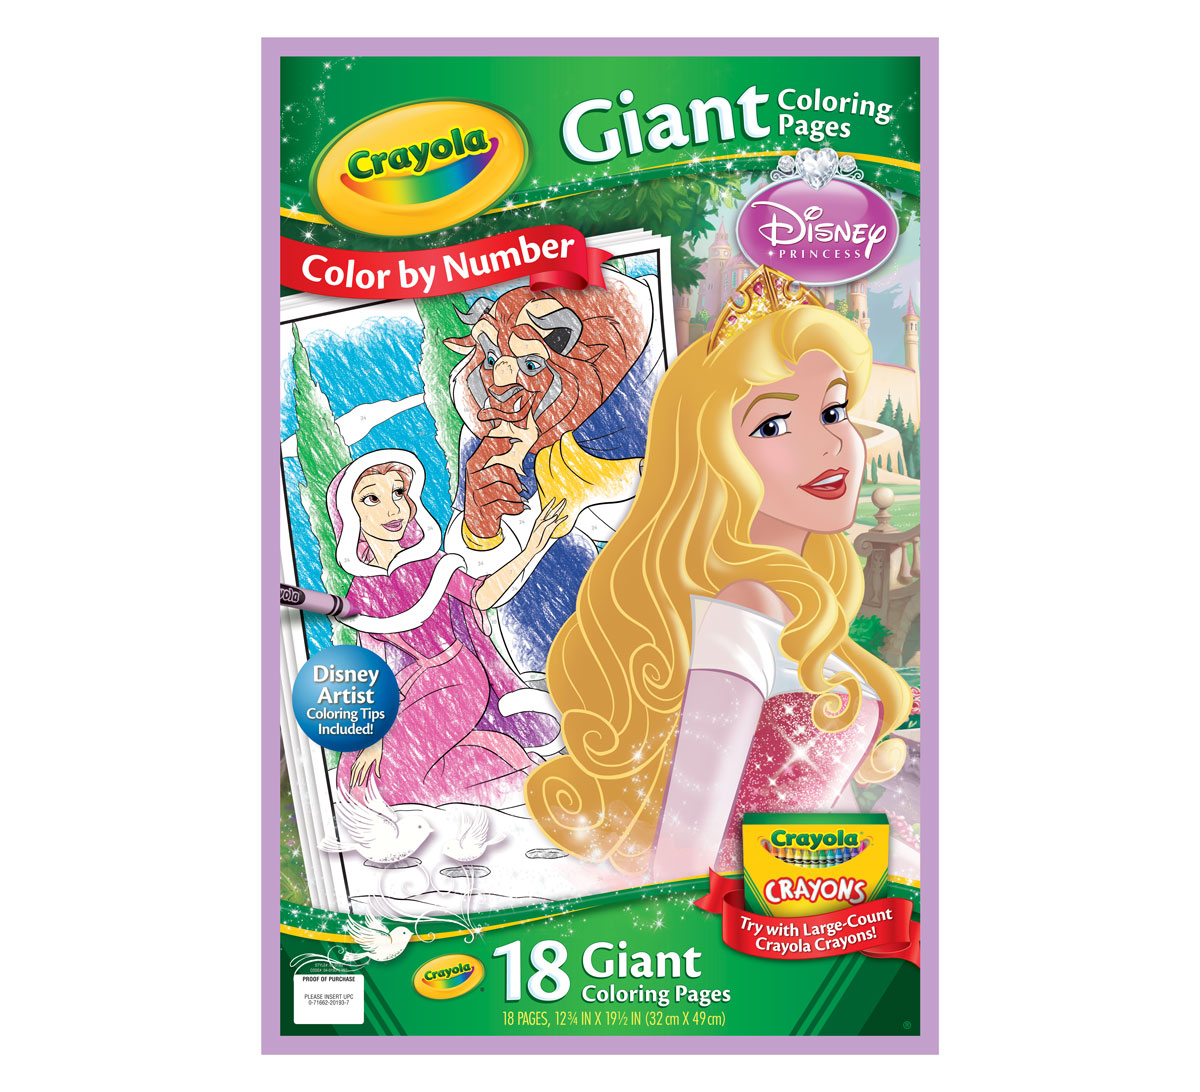 Giant Coloring Pages   Disney Princess   Crayola